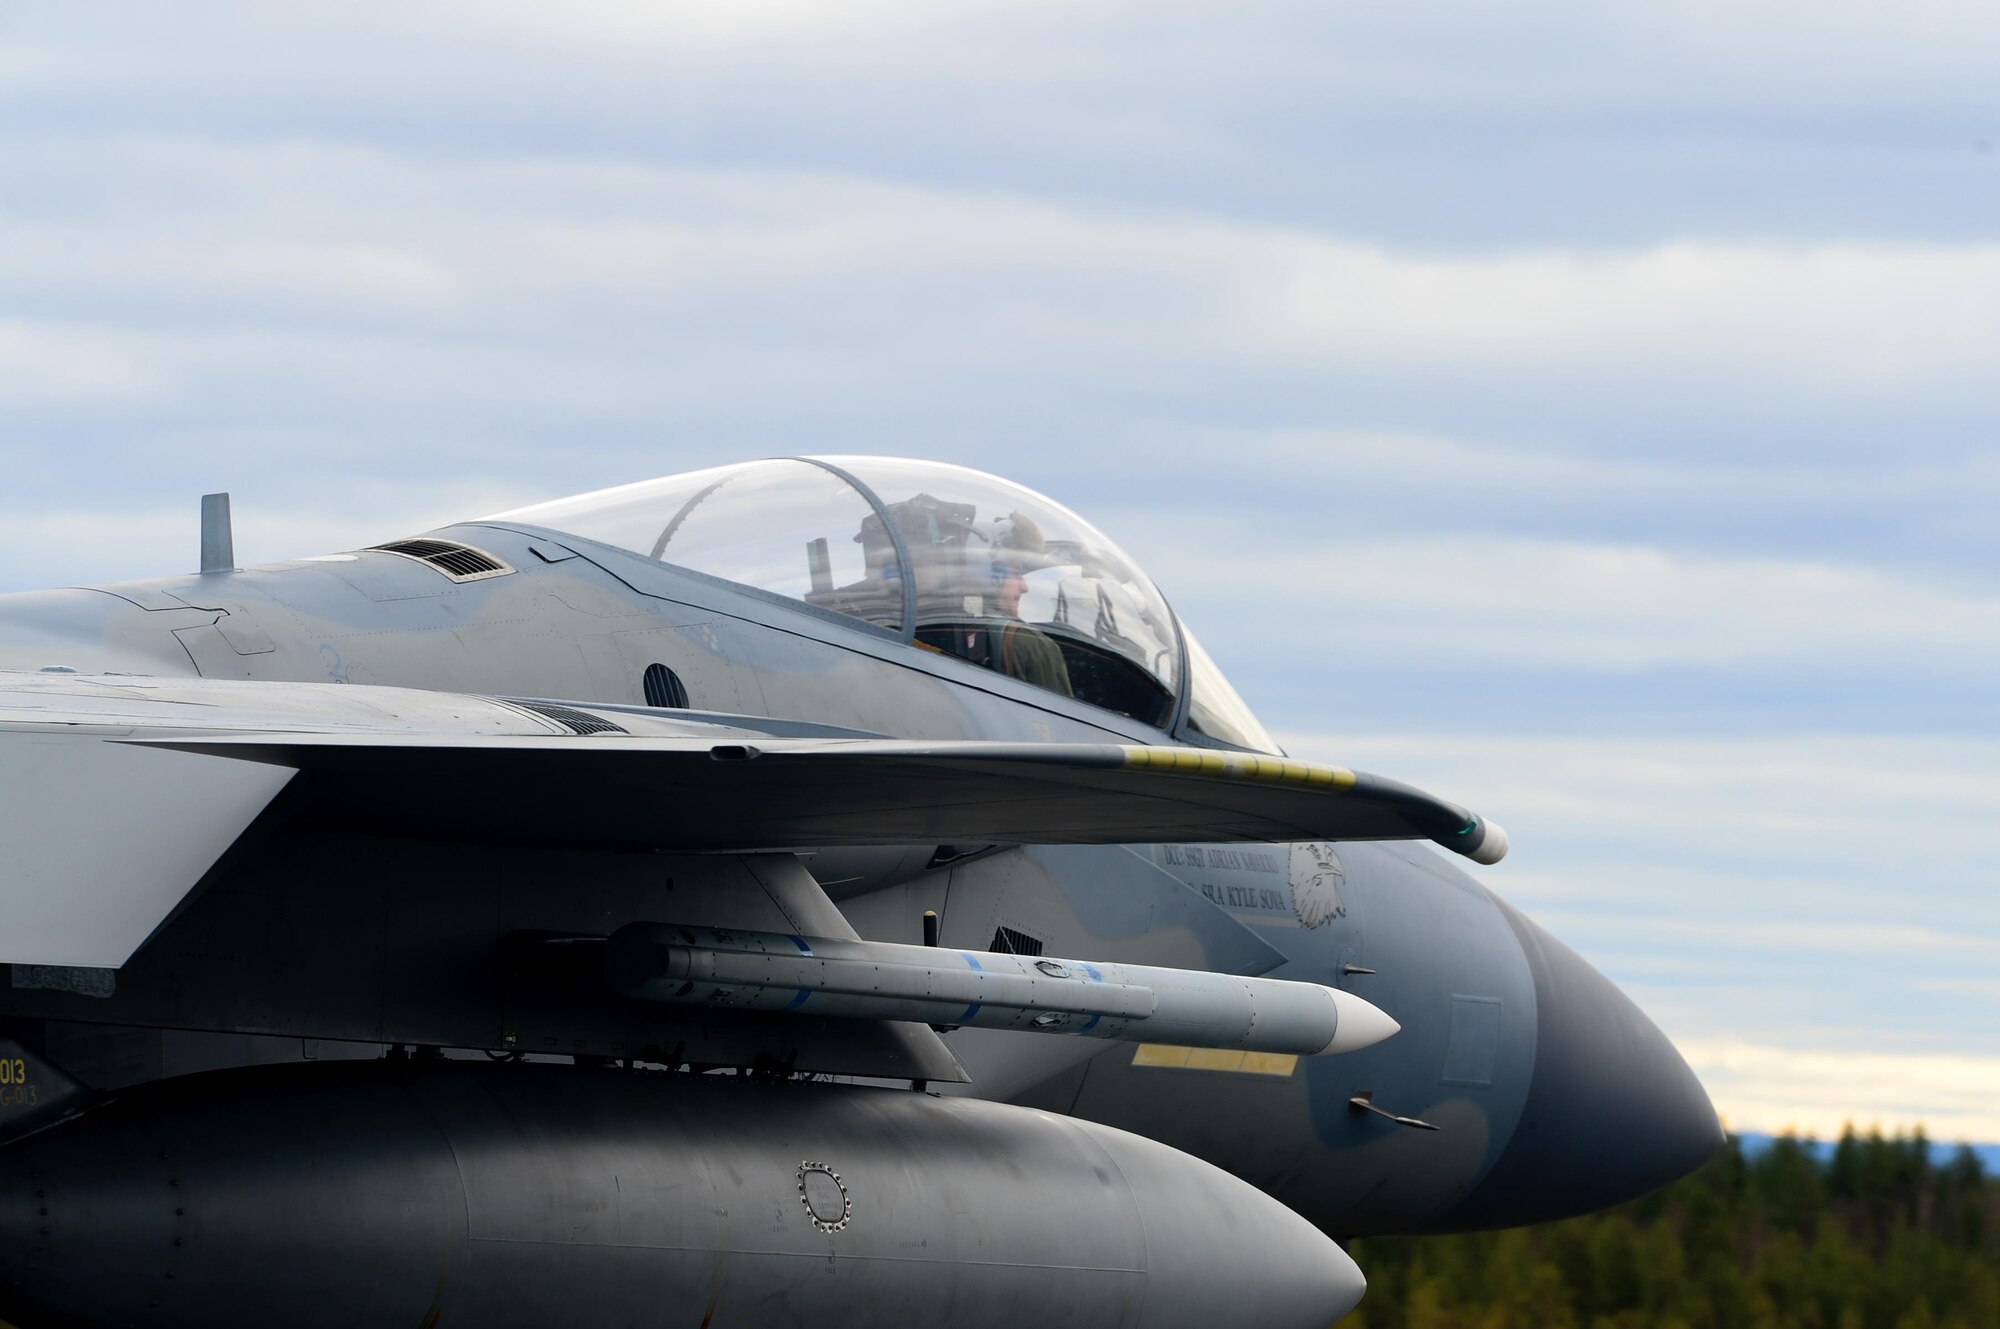 An F-15C Eagle from the 493rd Fighter Squadron, Royal Air Force Lakenheath, England, taxis to the runway for the first sortie of the day at Rovaniemi Air Base, Finland, May 26, in support of Arctic Challenge 2017. The Reapers joined counterparts from 10 other nations, along with representatives from NATO, for the exercise to build on their expertise in the air and increase interoperability. (U.S. Air Force photo/Airman 1st Class Abby L. Finkel)